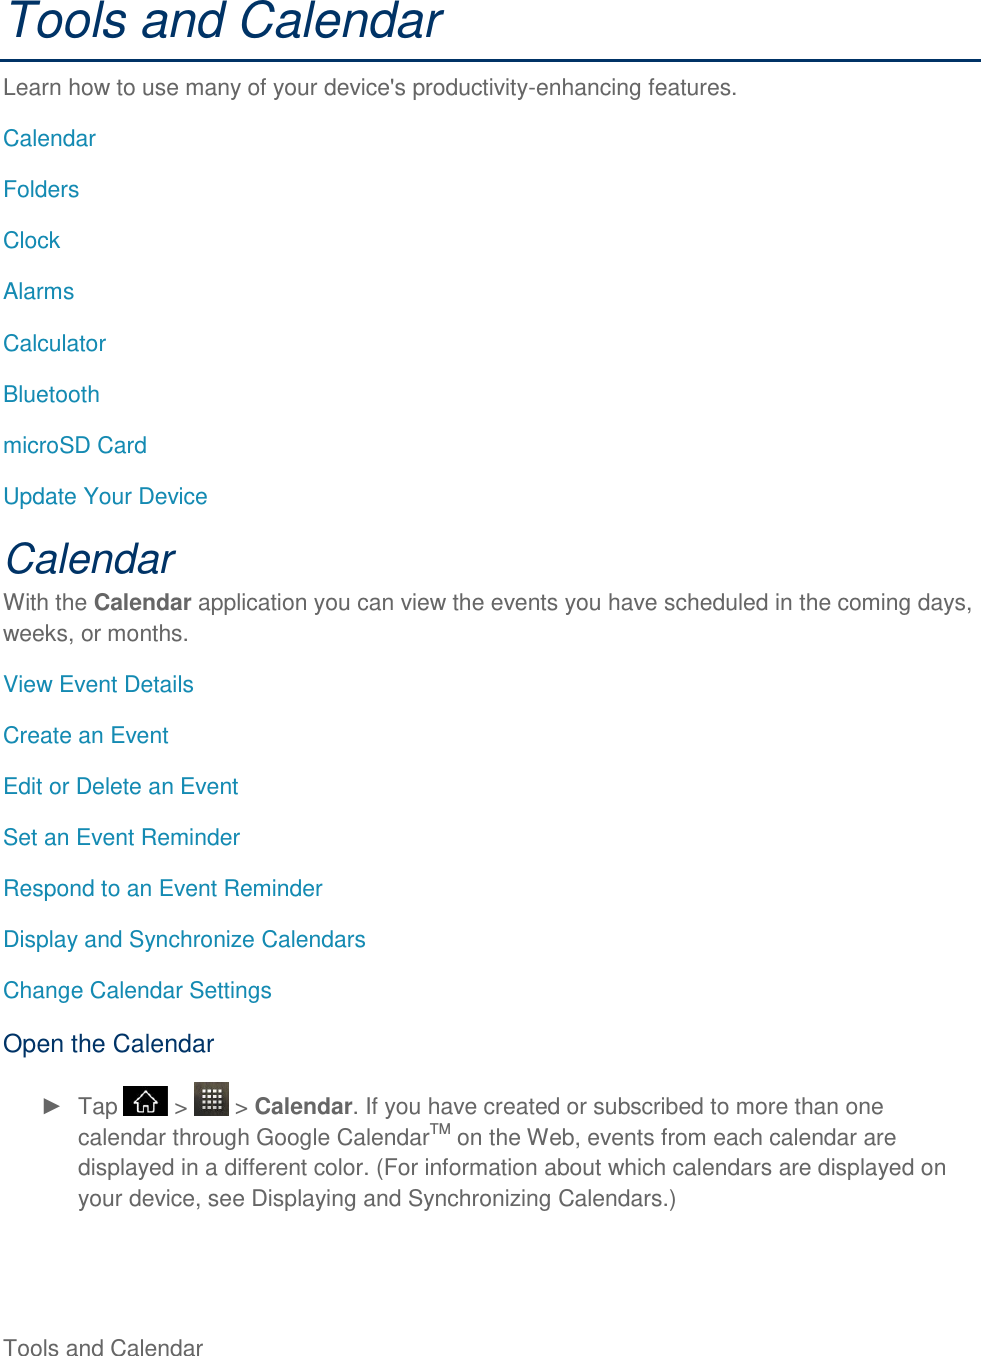  Tools and Calendar     Tools and Calendar Learn how to use many of your device&apos;s productivity-enhancing features. Calendar Folders Clock Alarms Calculator Bluetooth microSD Card Update Your Device Calendar With the Calendar application you can view the events you have scheduled in the coming days, weeks, or months. View Event Details Create an Event Edit or Delete an Event Set an Event Reminder Respond to an Event Reminder Display and Synchronize Calendars Change Calendar Settings Open the Calendar   Tap   &gt;   &gt; Calendar. If you have created or subscribed to more than one calendar through Google CalendarTM on the Web, events from each calendar are displayed in a different color. (For information about which calendars are displayed on your device, see Displaying and Synchronizing Calendars.) 